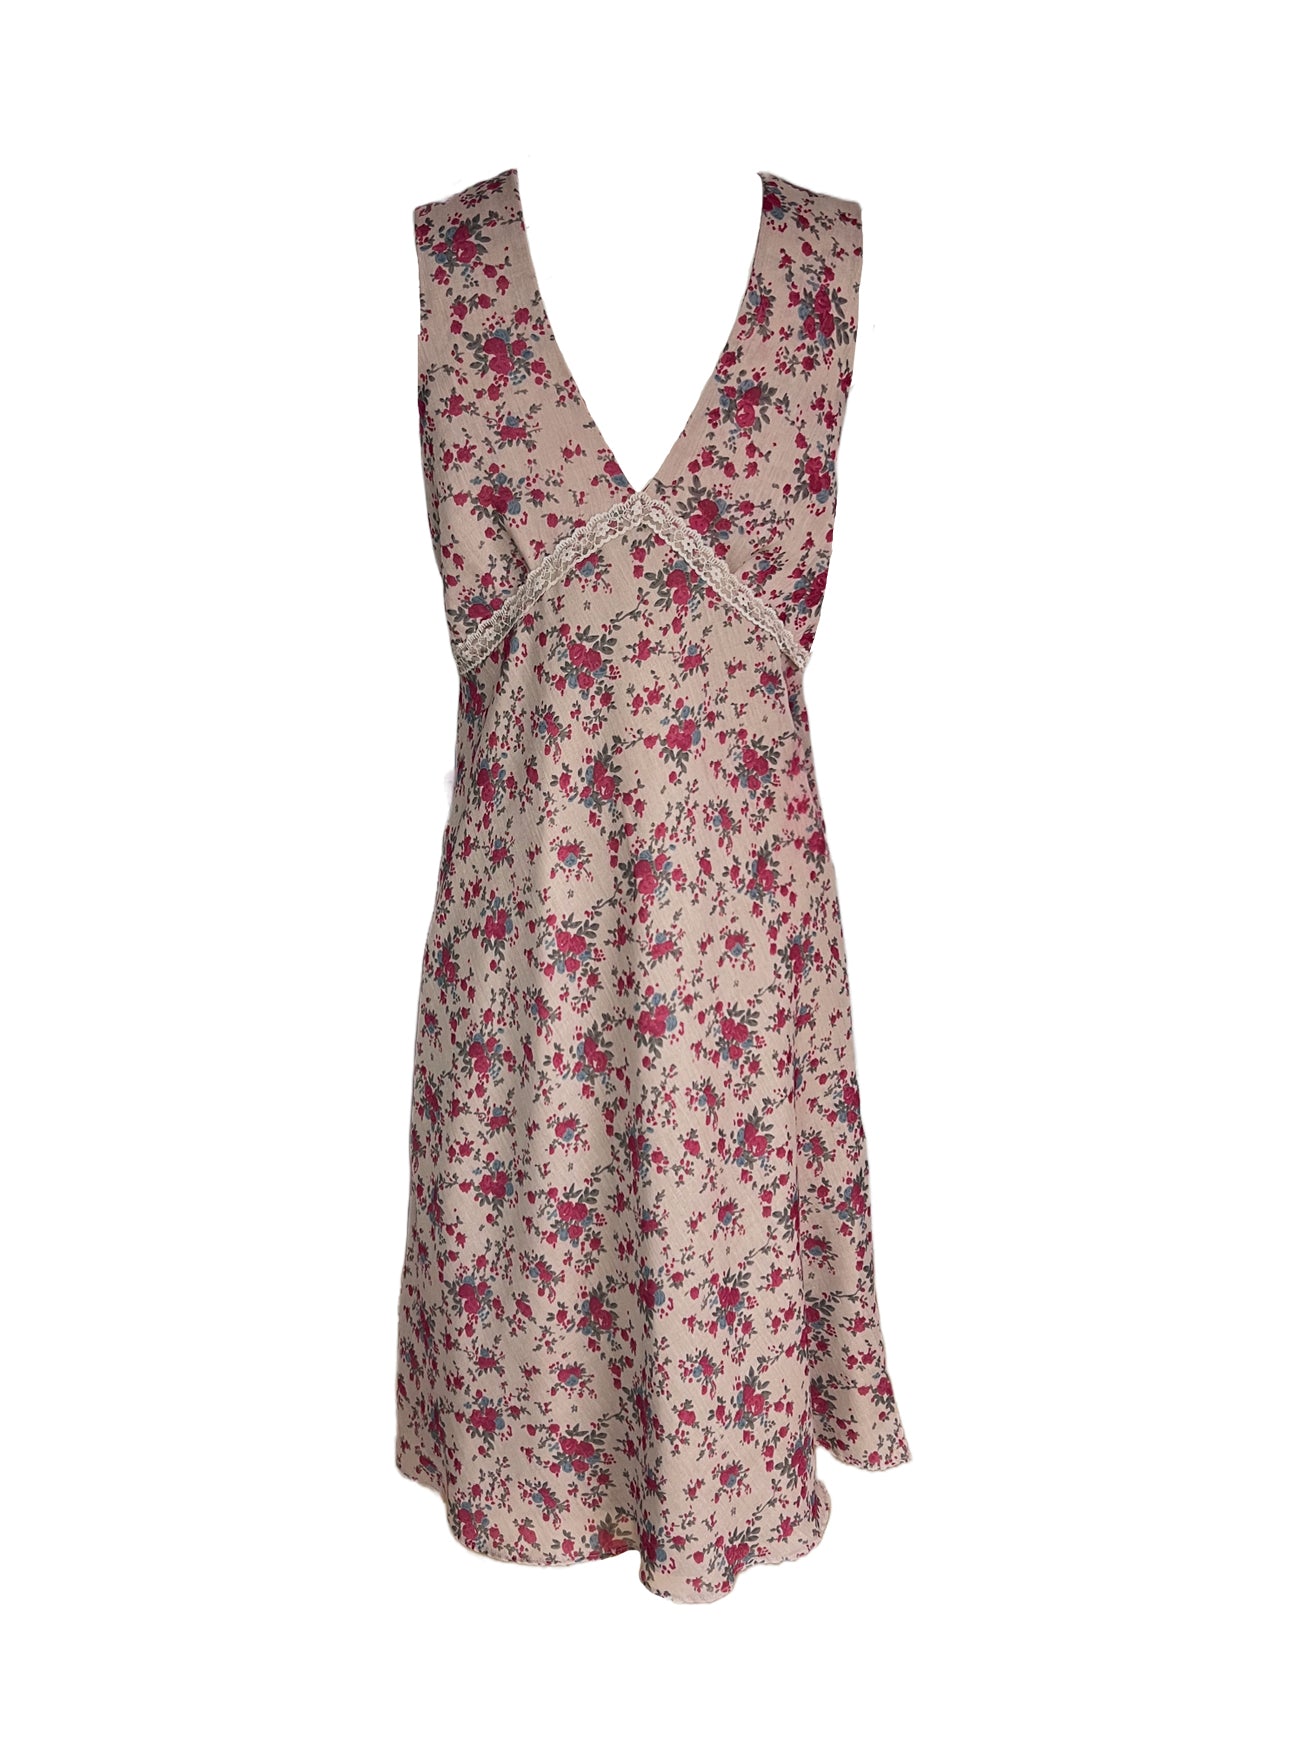 riley rose print voile dress back view